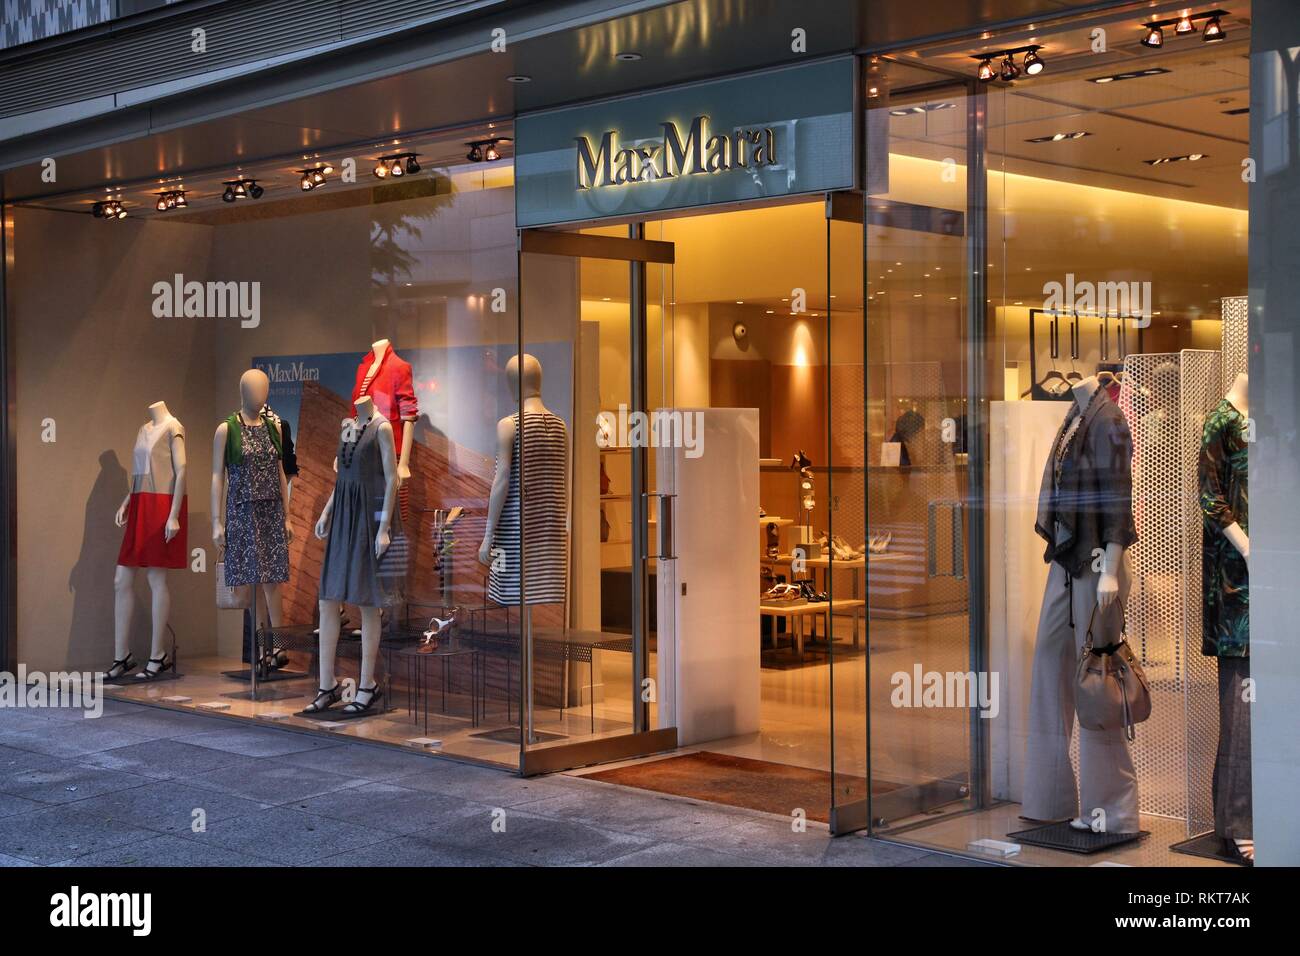 Max Mara Fashion Group High Resolution Stock Photography and Images - Alamy